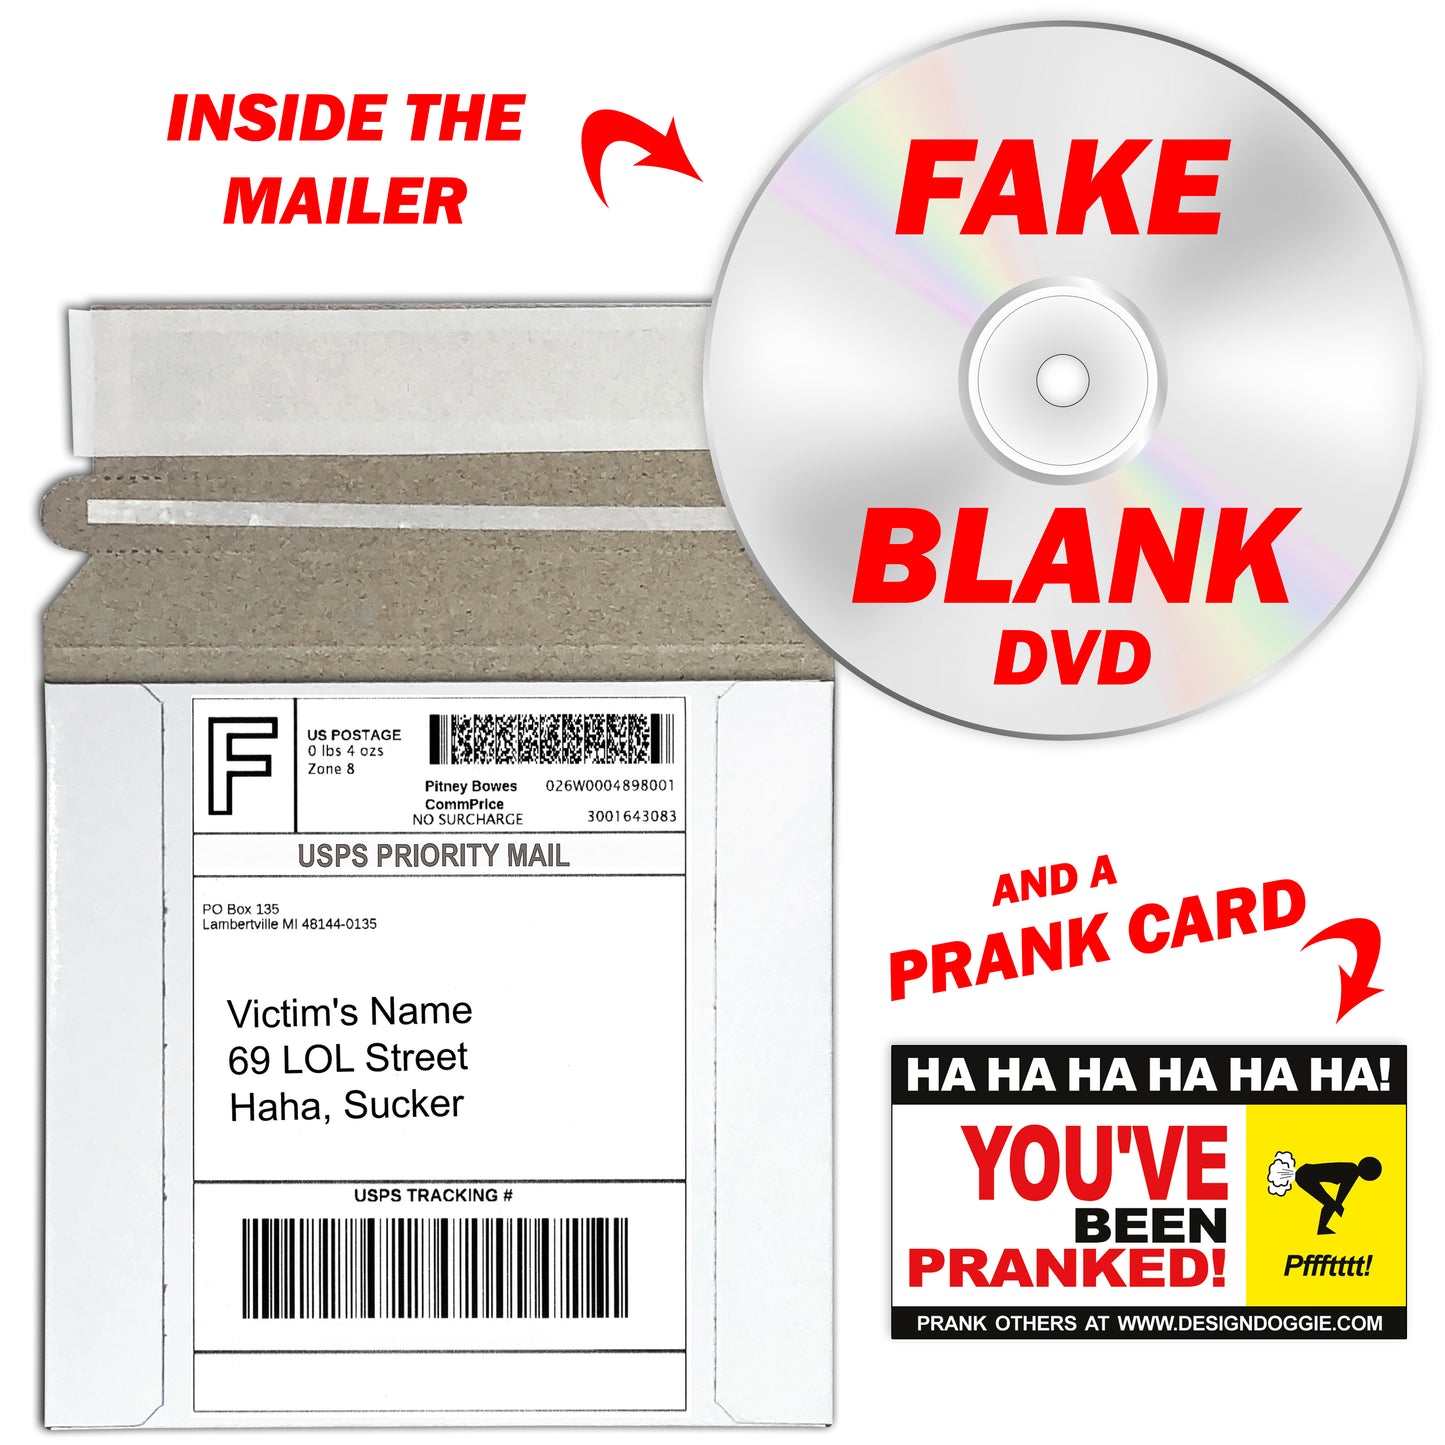 How To Secretly Fart In Public Fake DVD mail prank gets sent directly to your victims 100% anonymously!